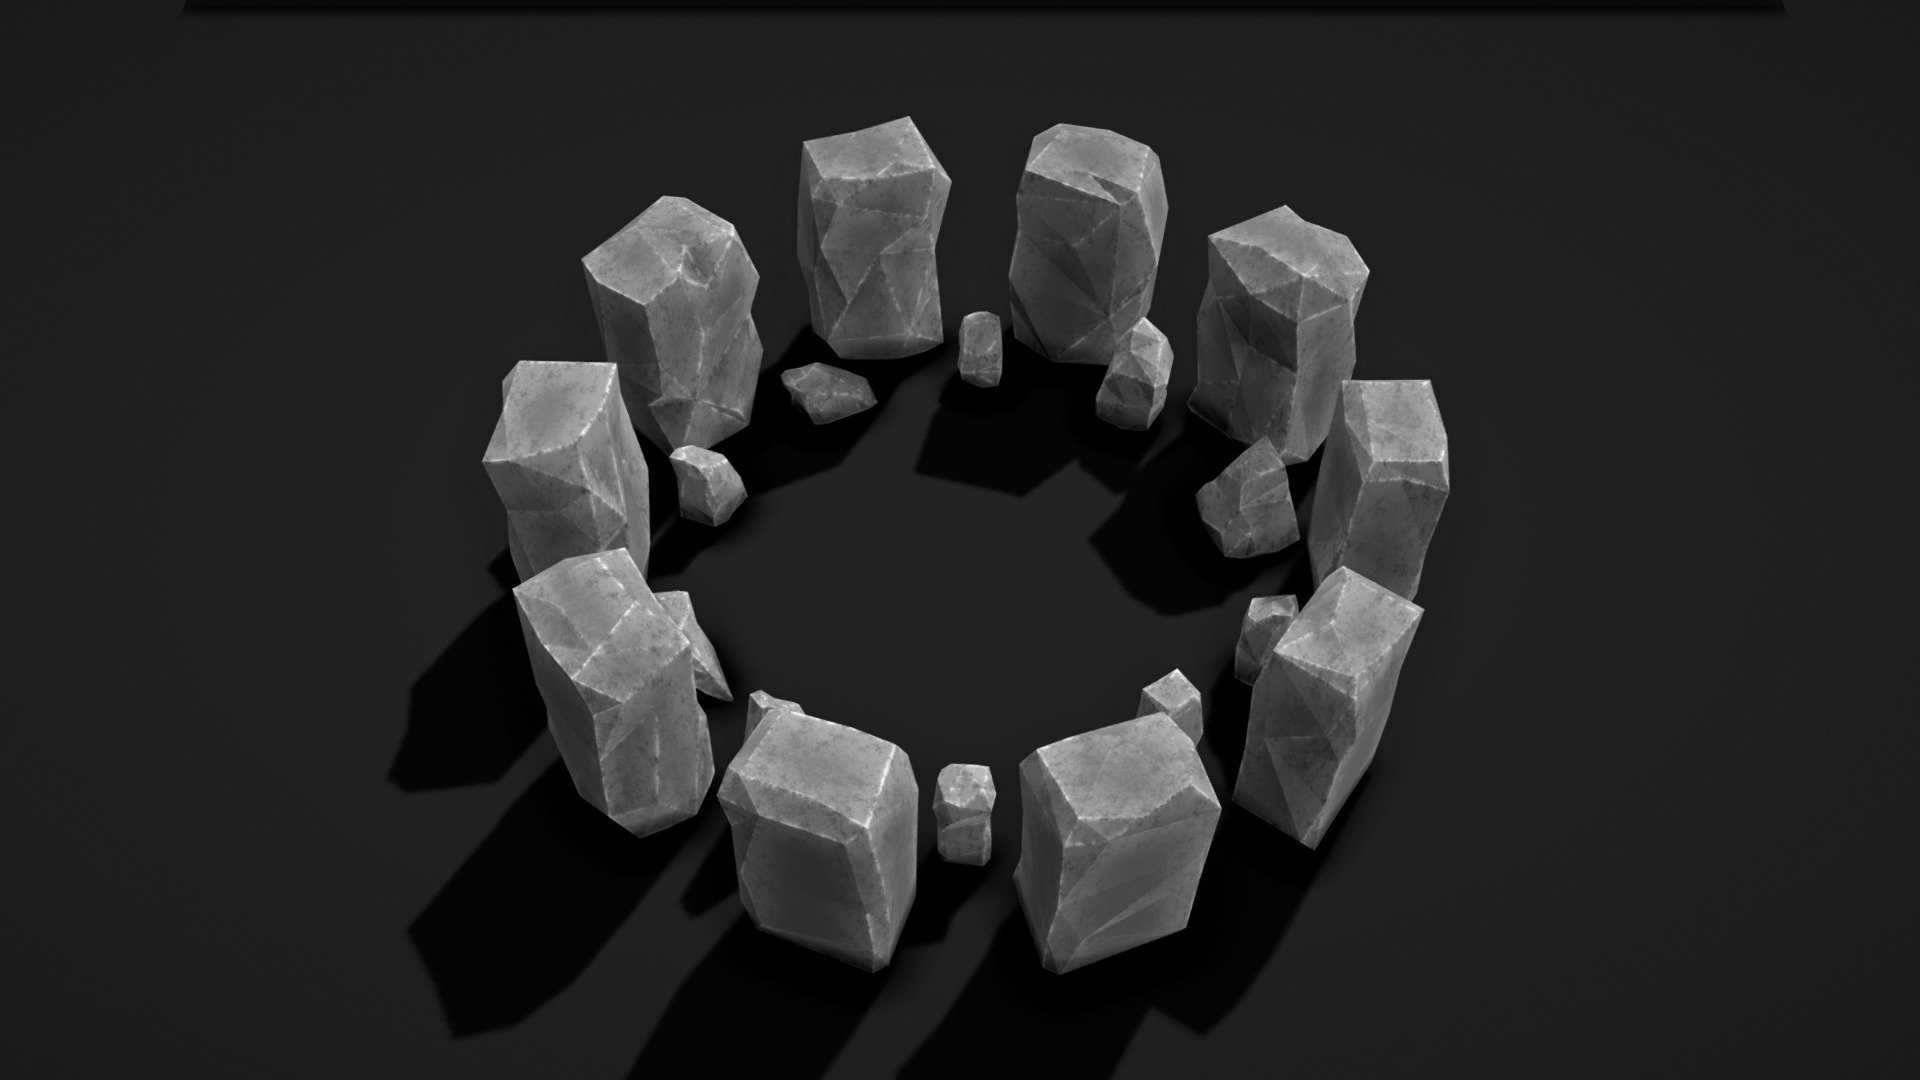 This is a pack of 20 Low-Poly Stones.

10 Big and 10 Small

All of these were Modeled and textured in blender Procedurally 3d model